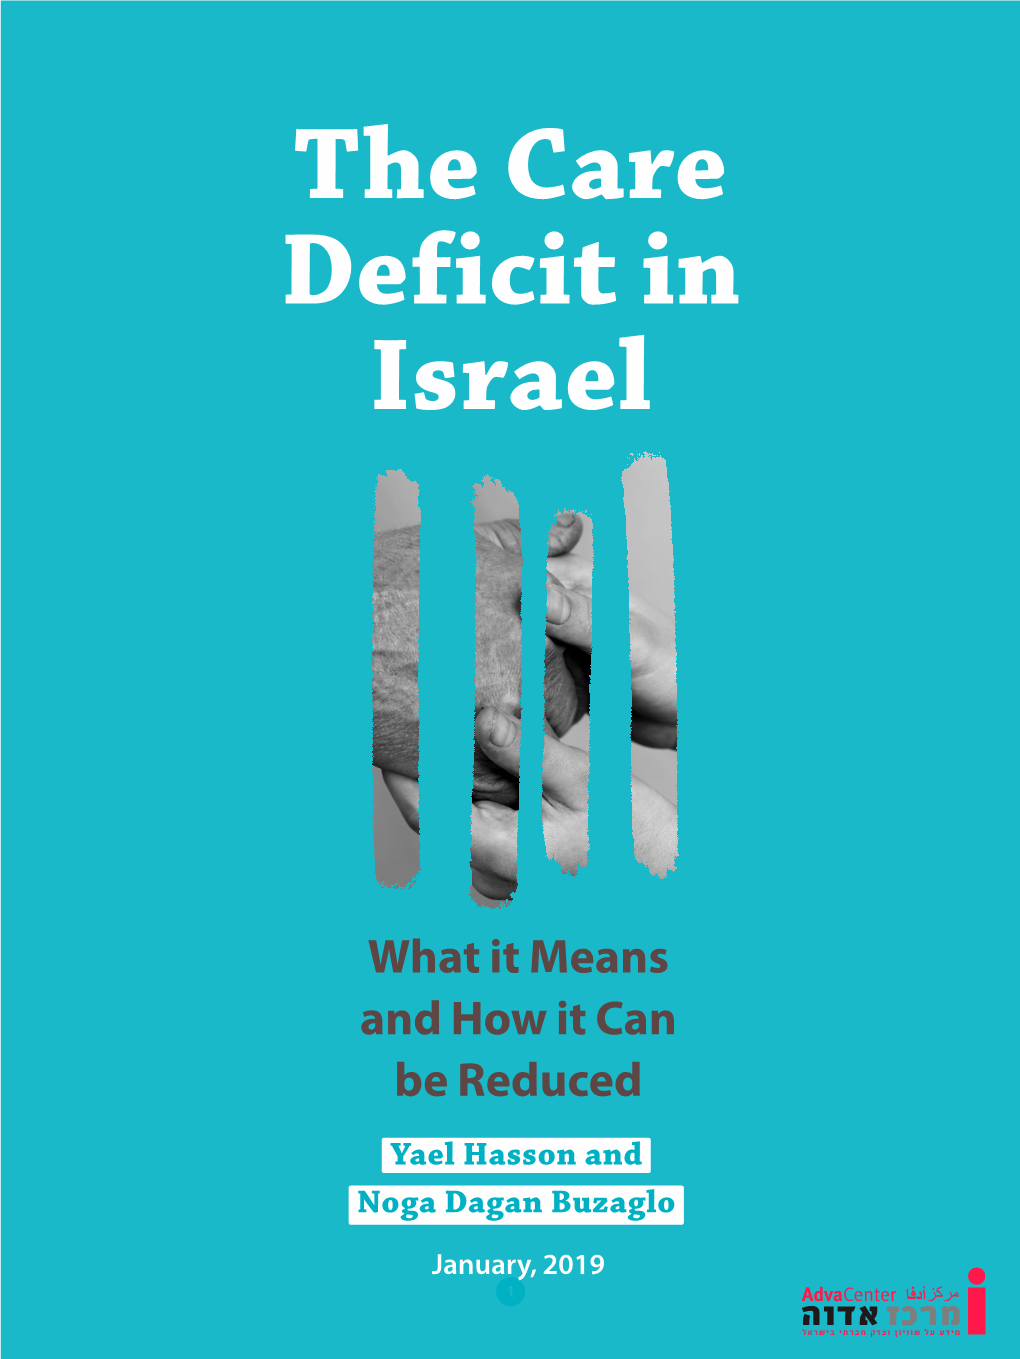 The Care Deficit in Israel